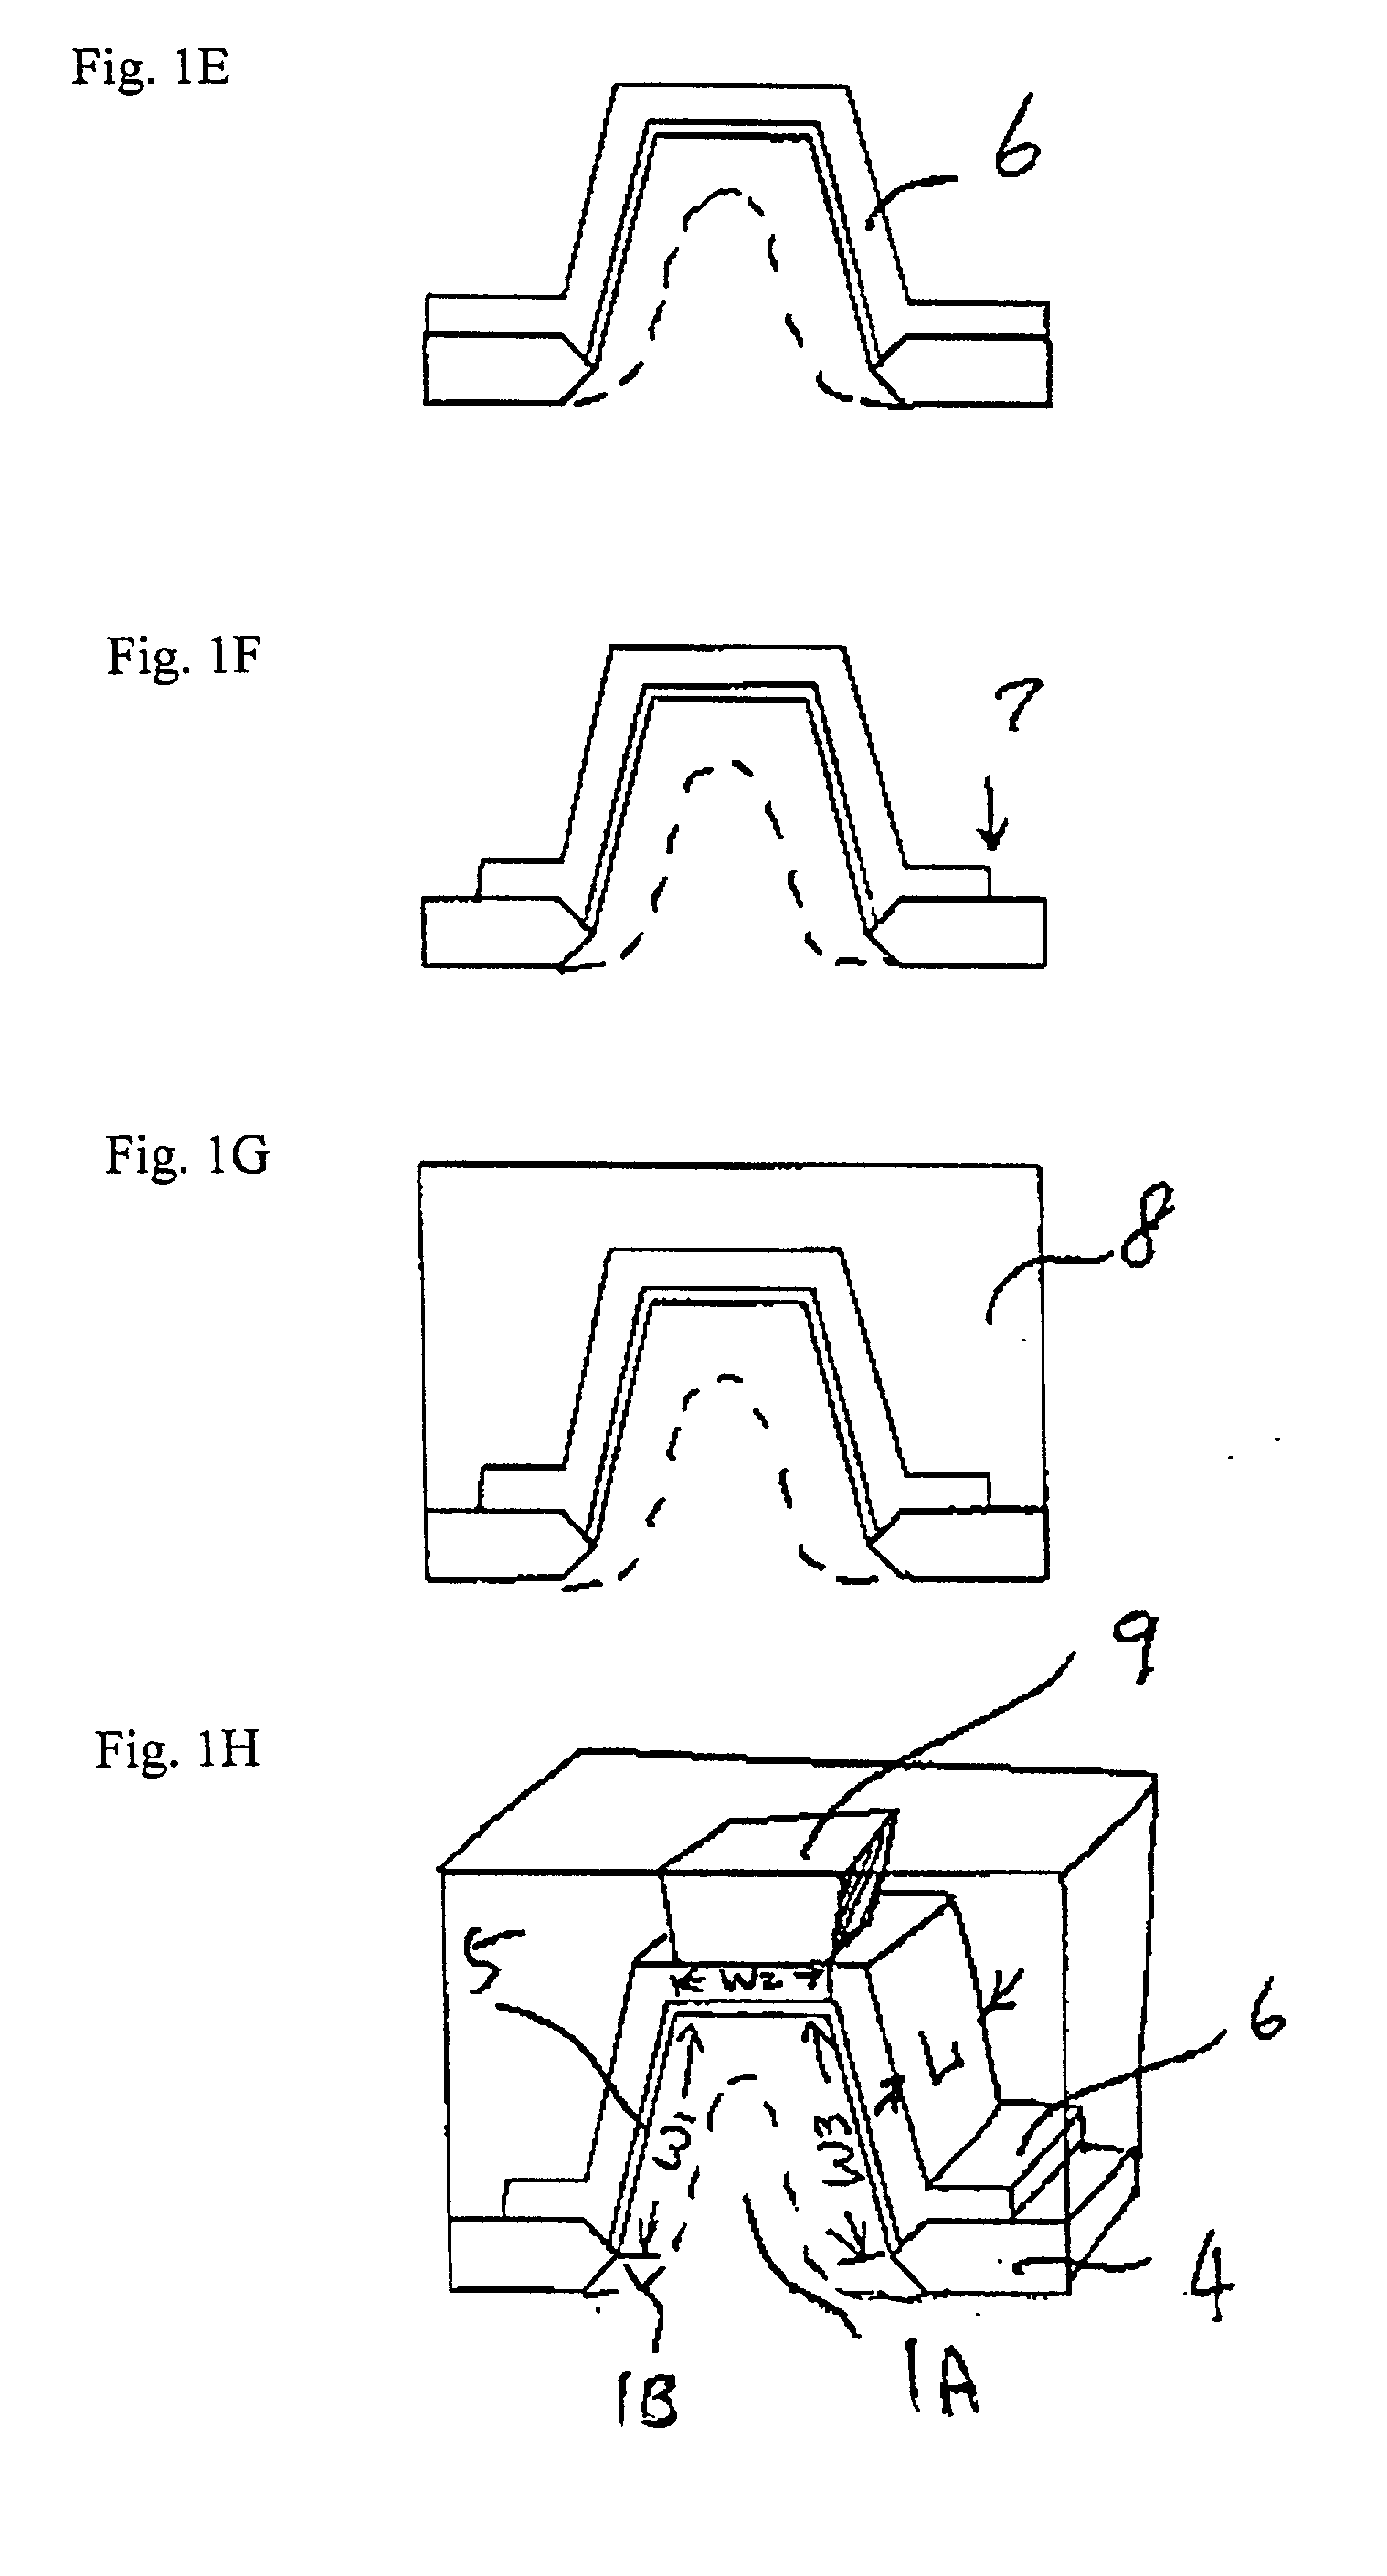 Method for increasing a very-large-scale-integrated (VLSI) capacitor size on bulk silicon and silicon-on-insulator (SOI) wafers